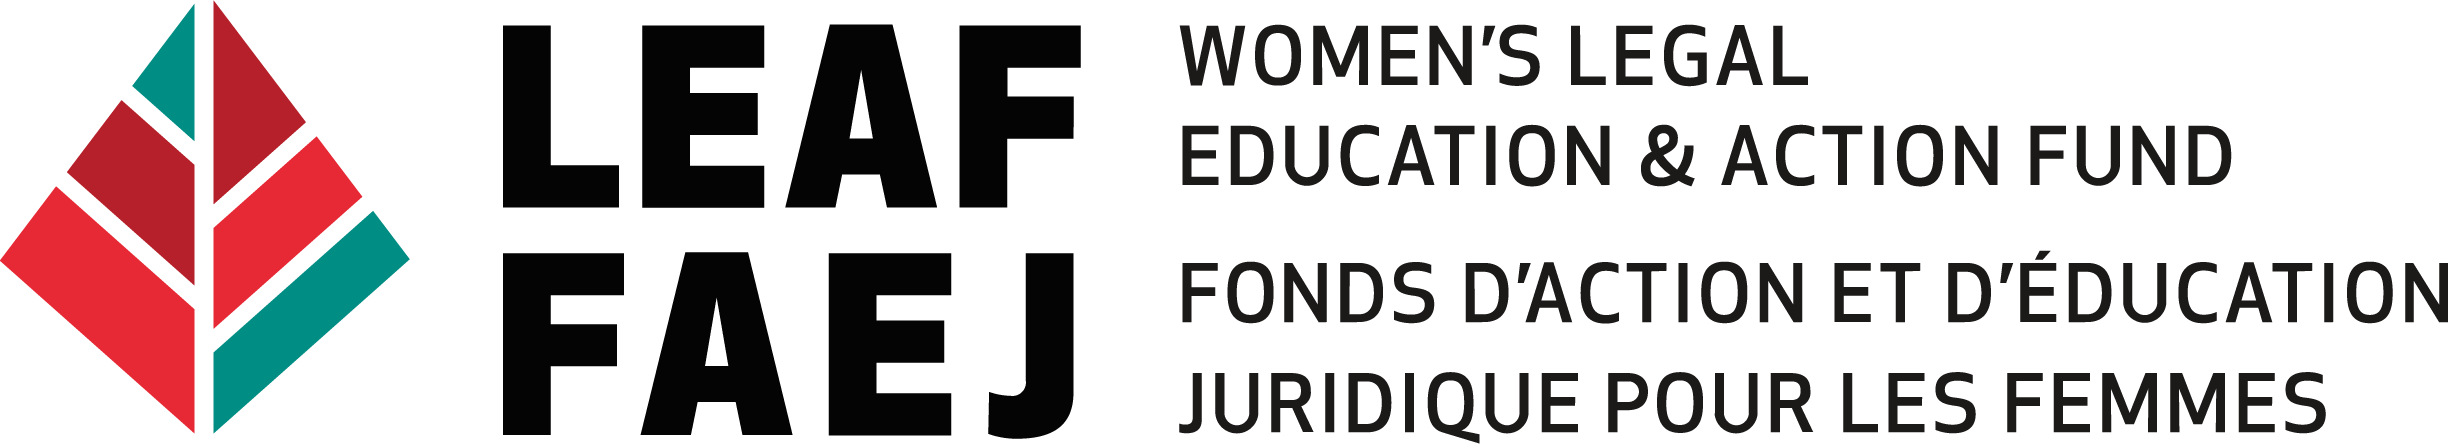 Women's Legal Education and Action Fund Inc. (LEAF).png